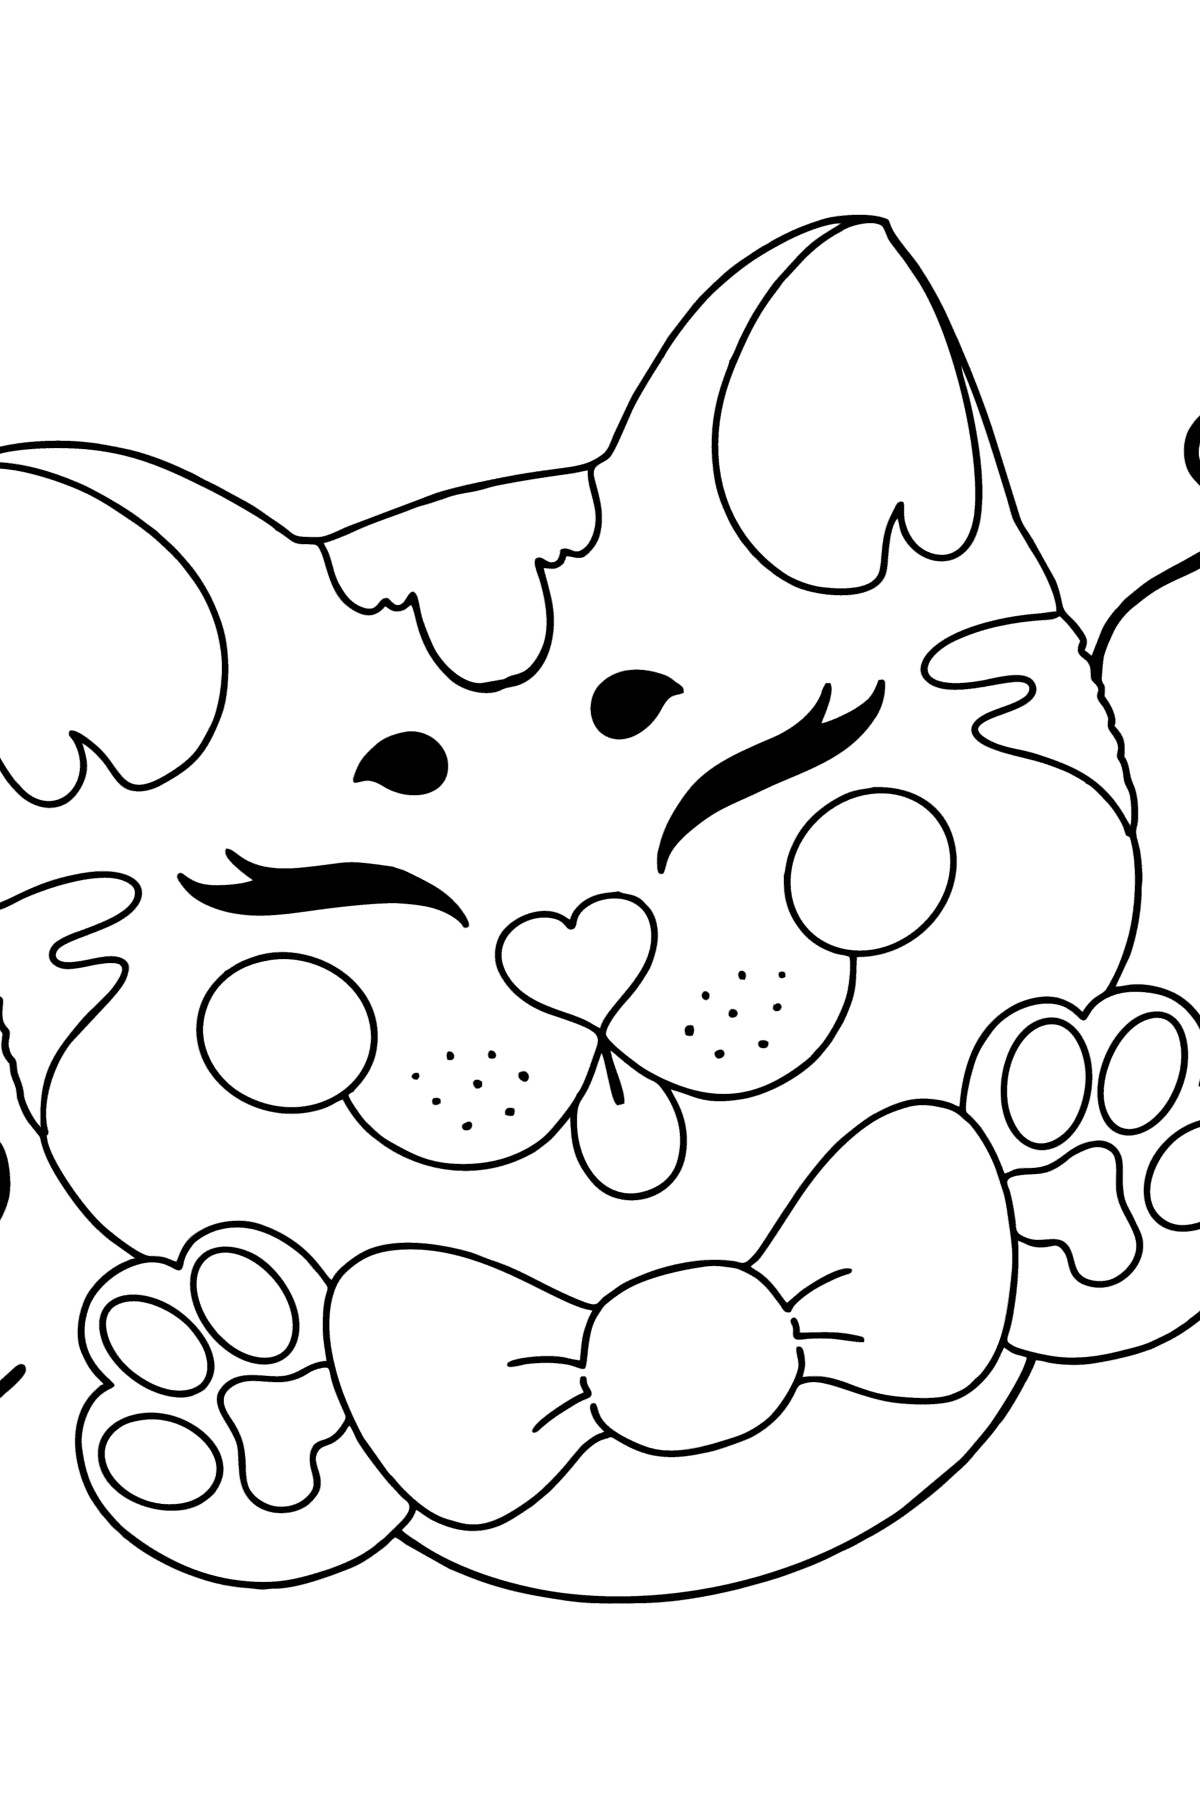 Cat Mask coloring page - Coloring Pages for Kids